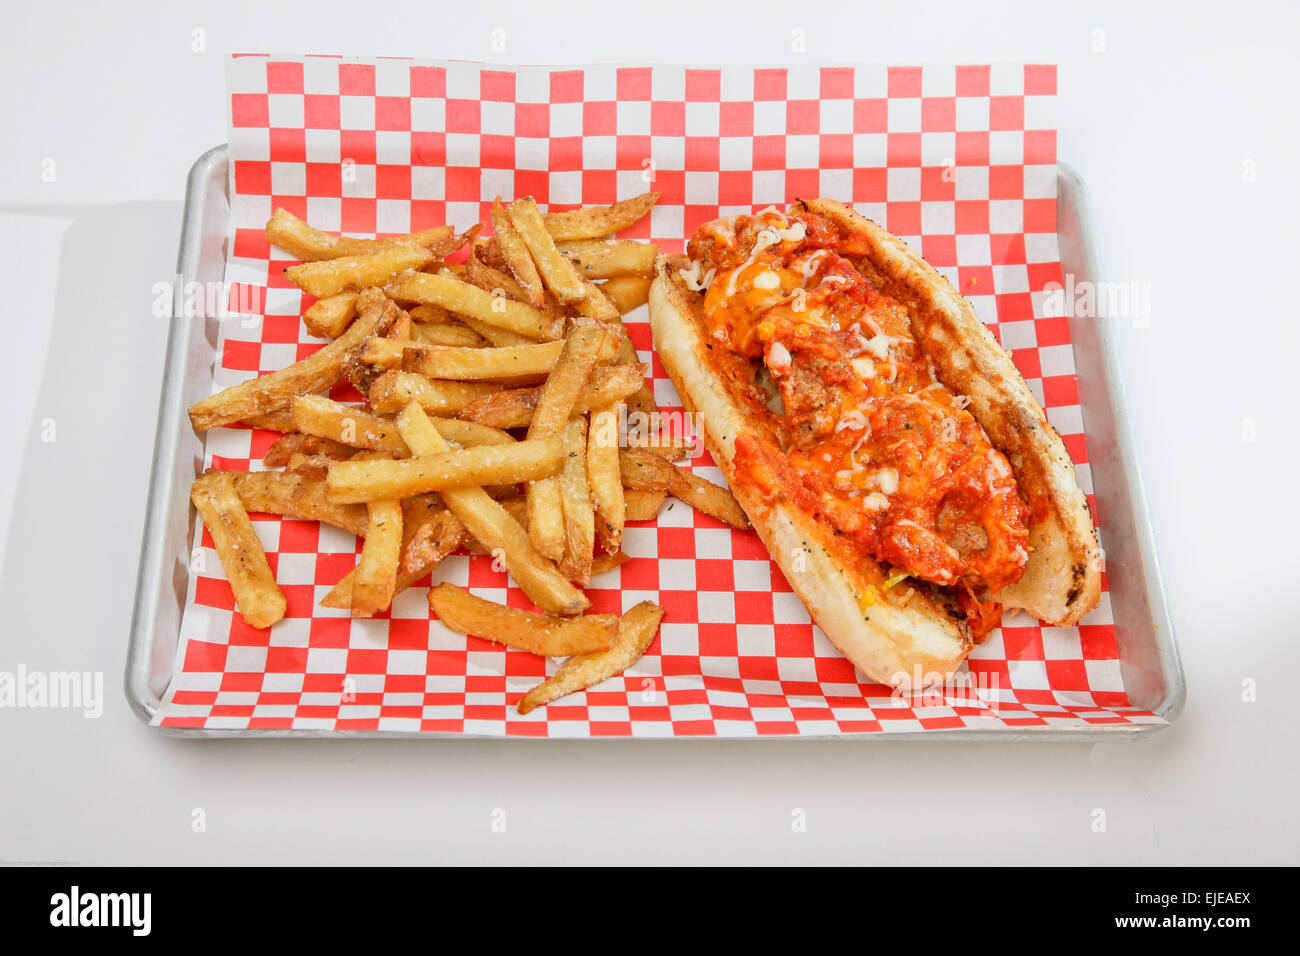 meatball sandwich and french fries Stock Photo